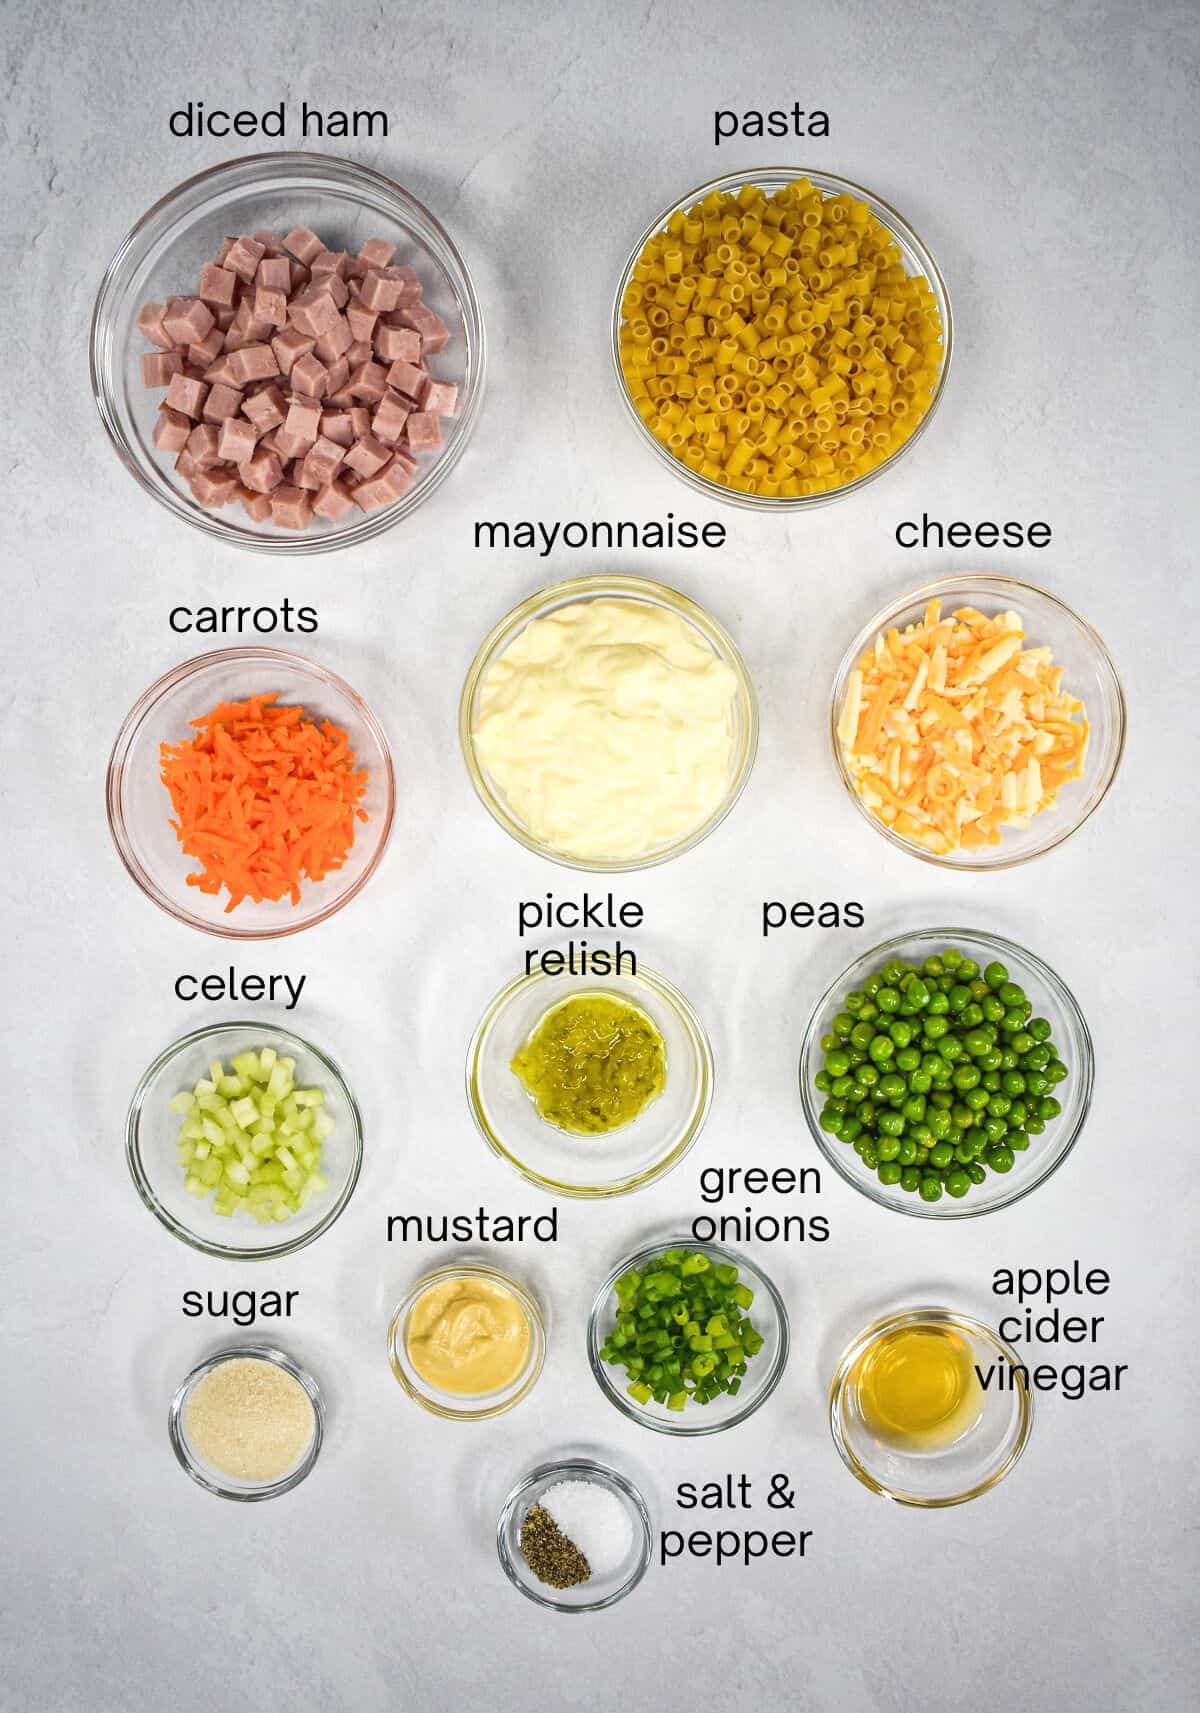 The ingredients for the ham pasta salad prepped and arranged in glass bowls on a table. Each one is labeled with small black letters.